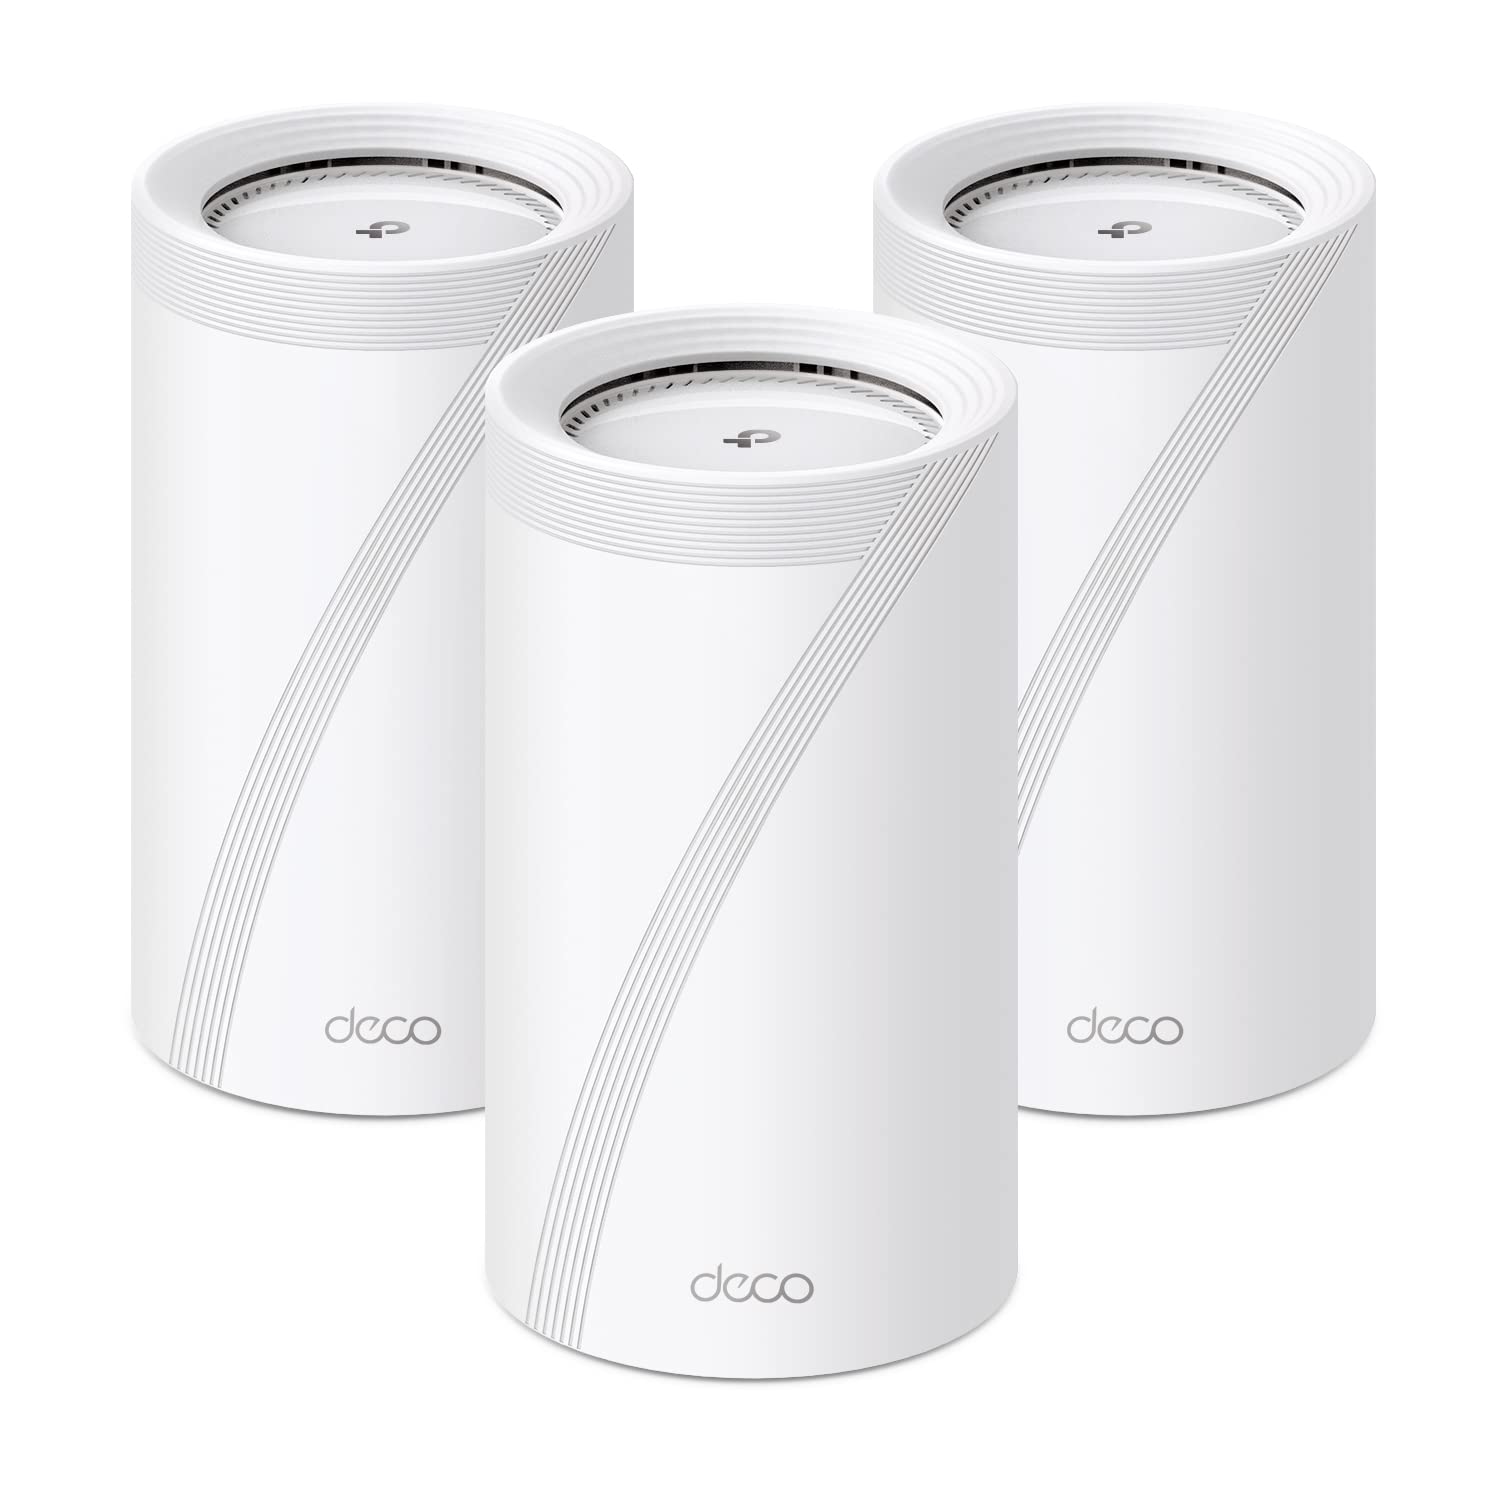 TP-Link Deco Tri-Band WiFi 7 BE22000 Whole Home Mesh System Deco BE85